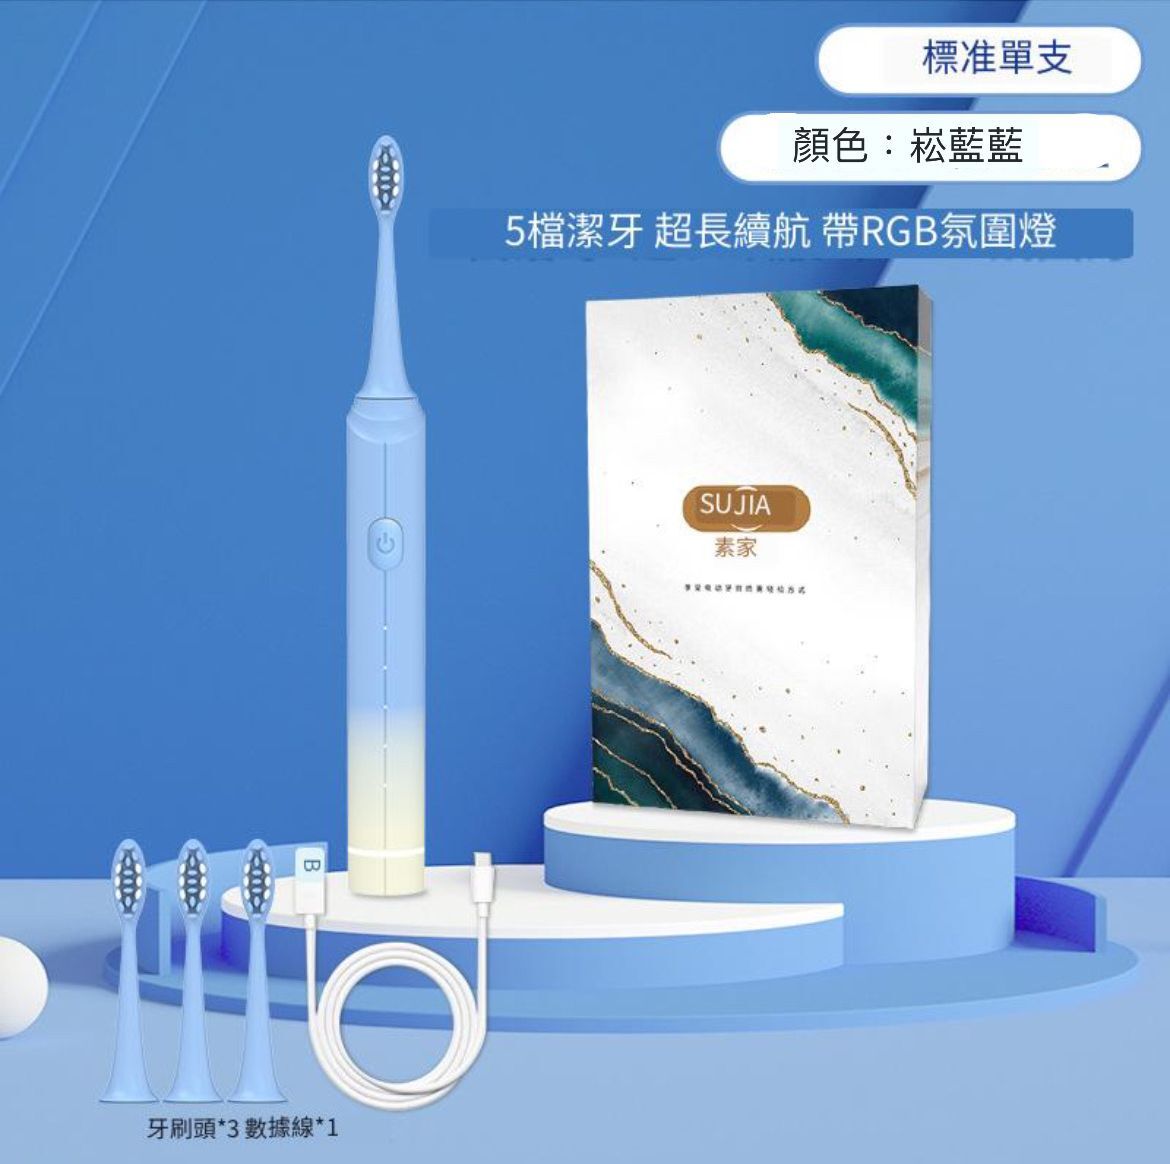 Song blue [RGB atmosphere light] [USB charging] [soft brush head] [parallel import] electric toothbrush 23.5cm * 15.5cm * 4cm